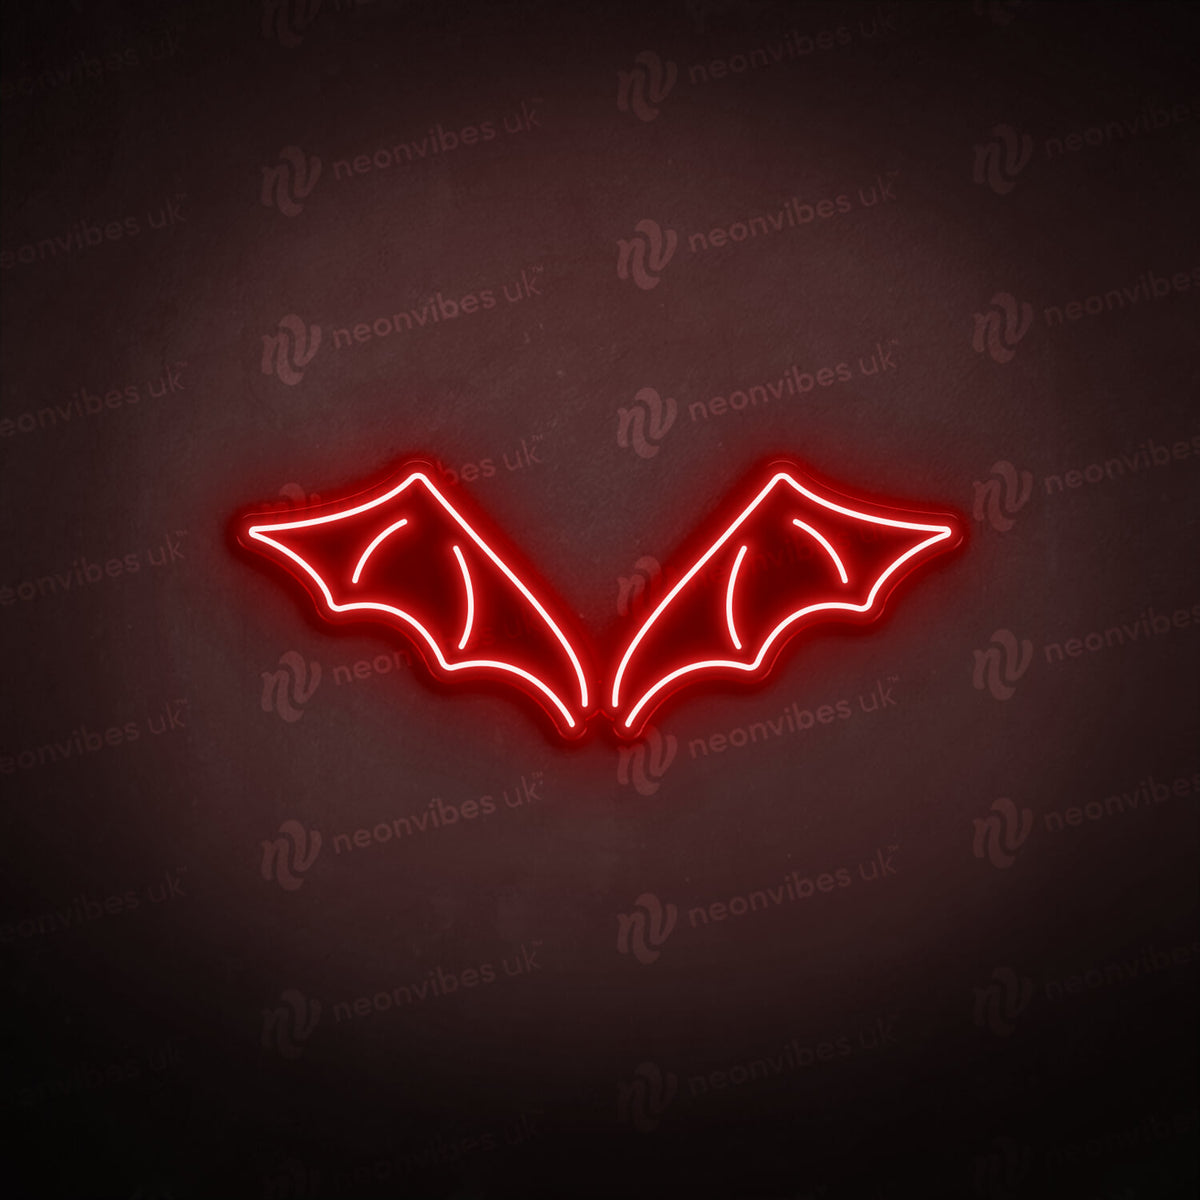 Batwings neon sign